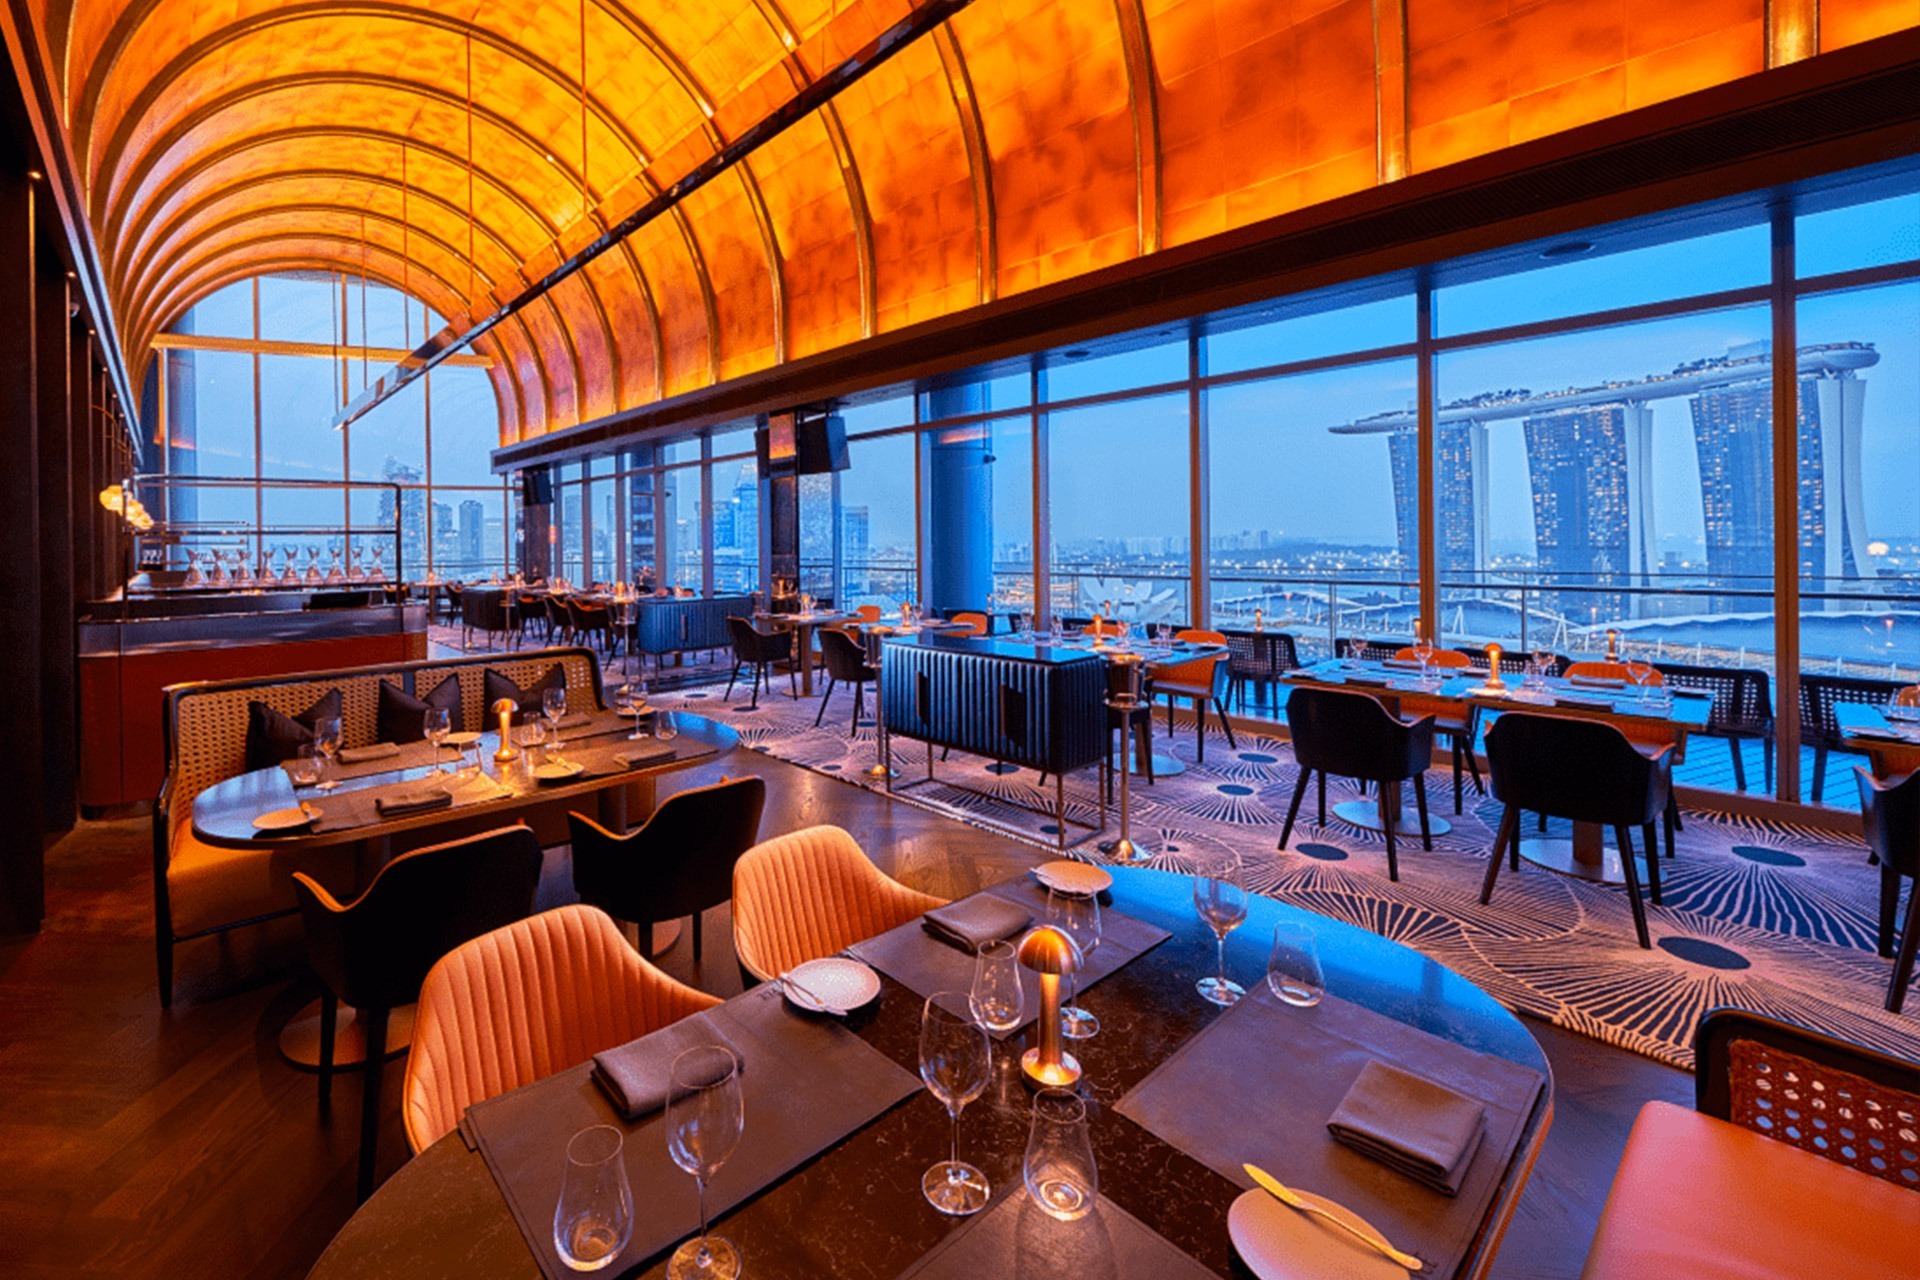 Overlooking Marina Bay, the new cult restaurant in Singapore is